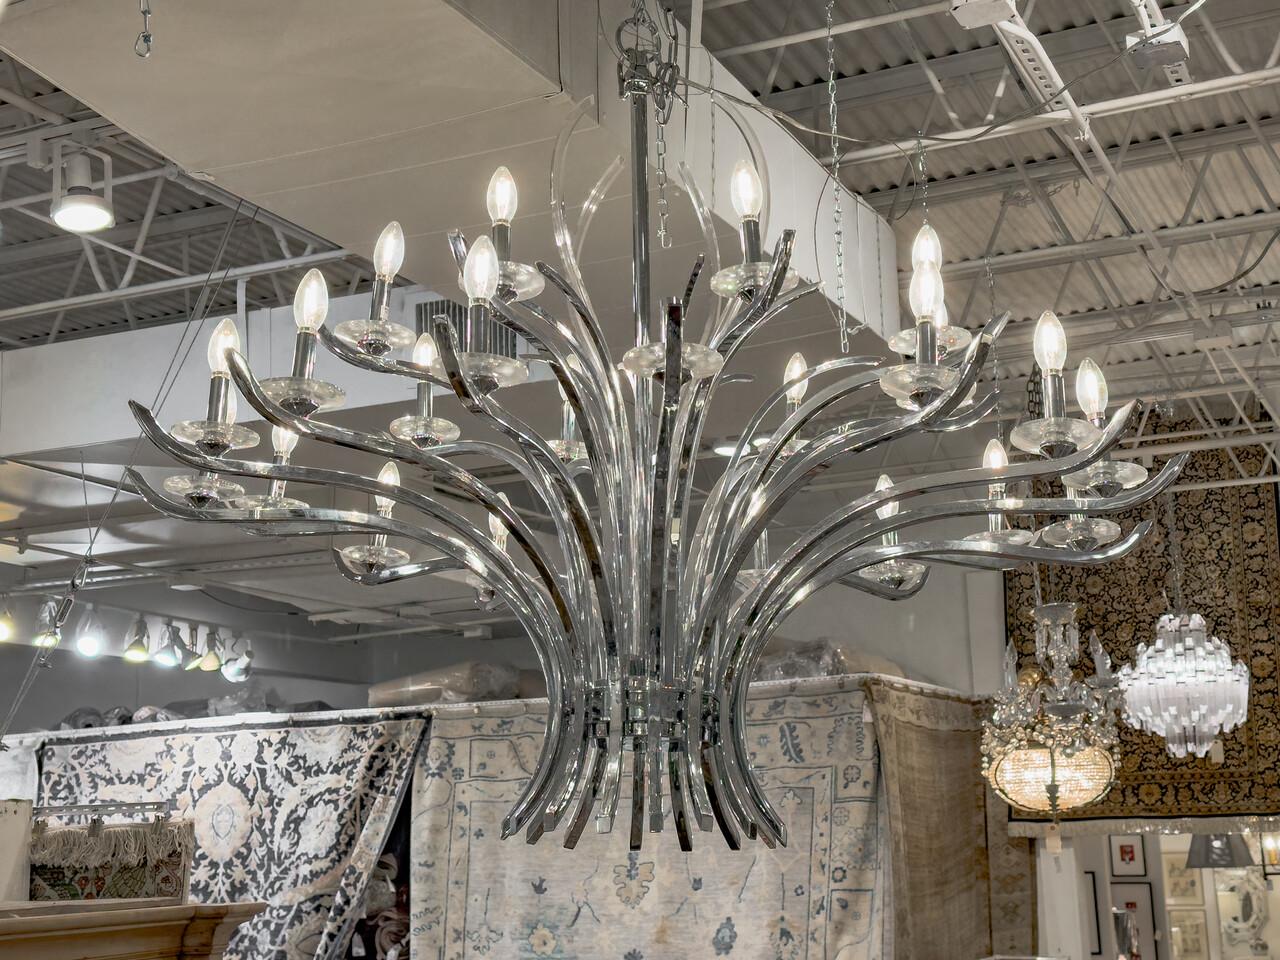 Elevate your space with timeless elegance and striking illumination courtesy of this Large Mid Century Modern Chrome Chandelier. With its sleek chrome finish and minimalist design, this chandelier embodies the essence of mid-century modern